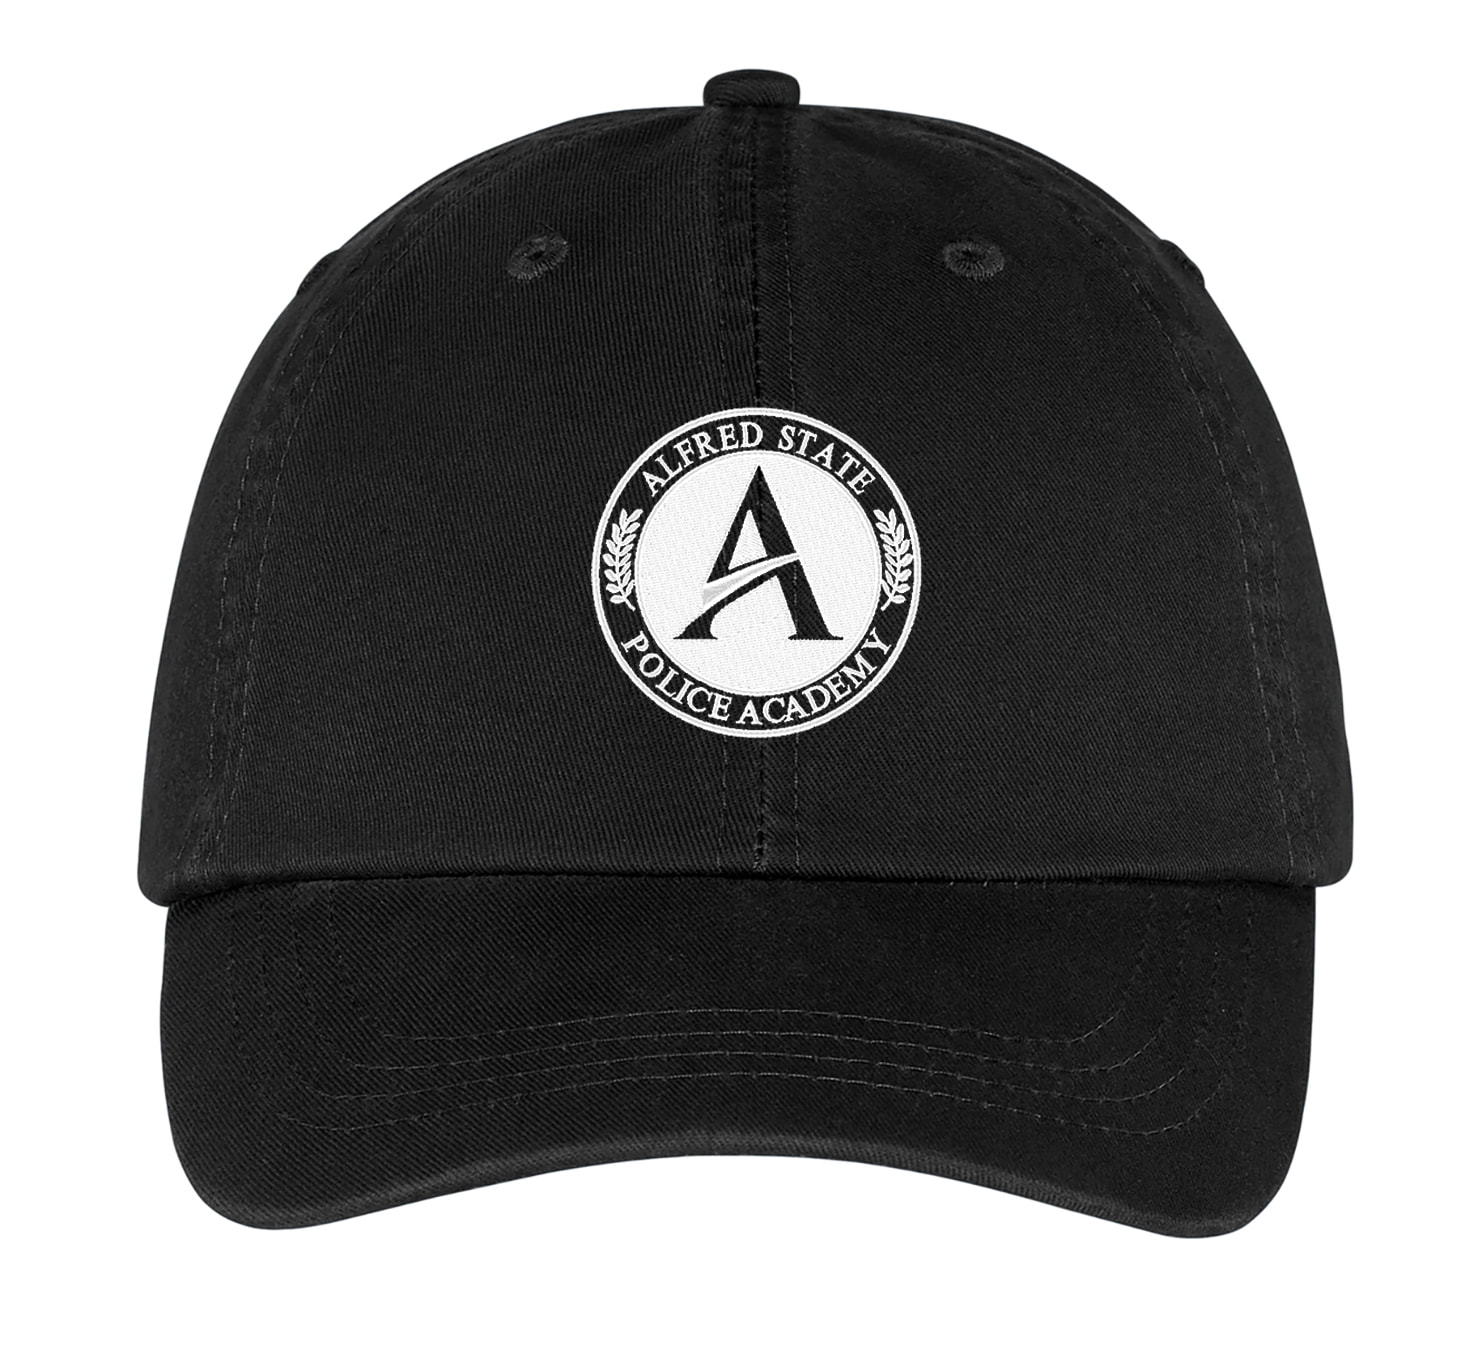 Alfred State College Police Academy - Washed Twill Cap